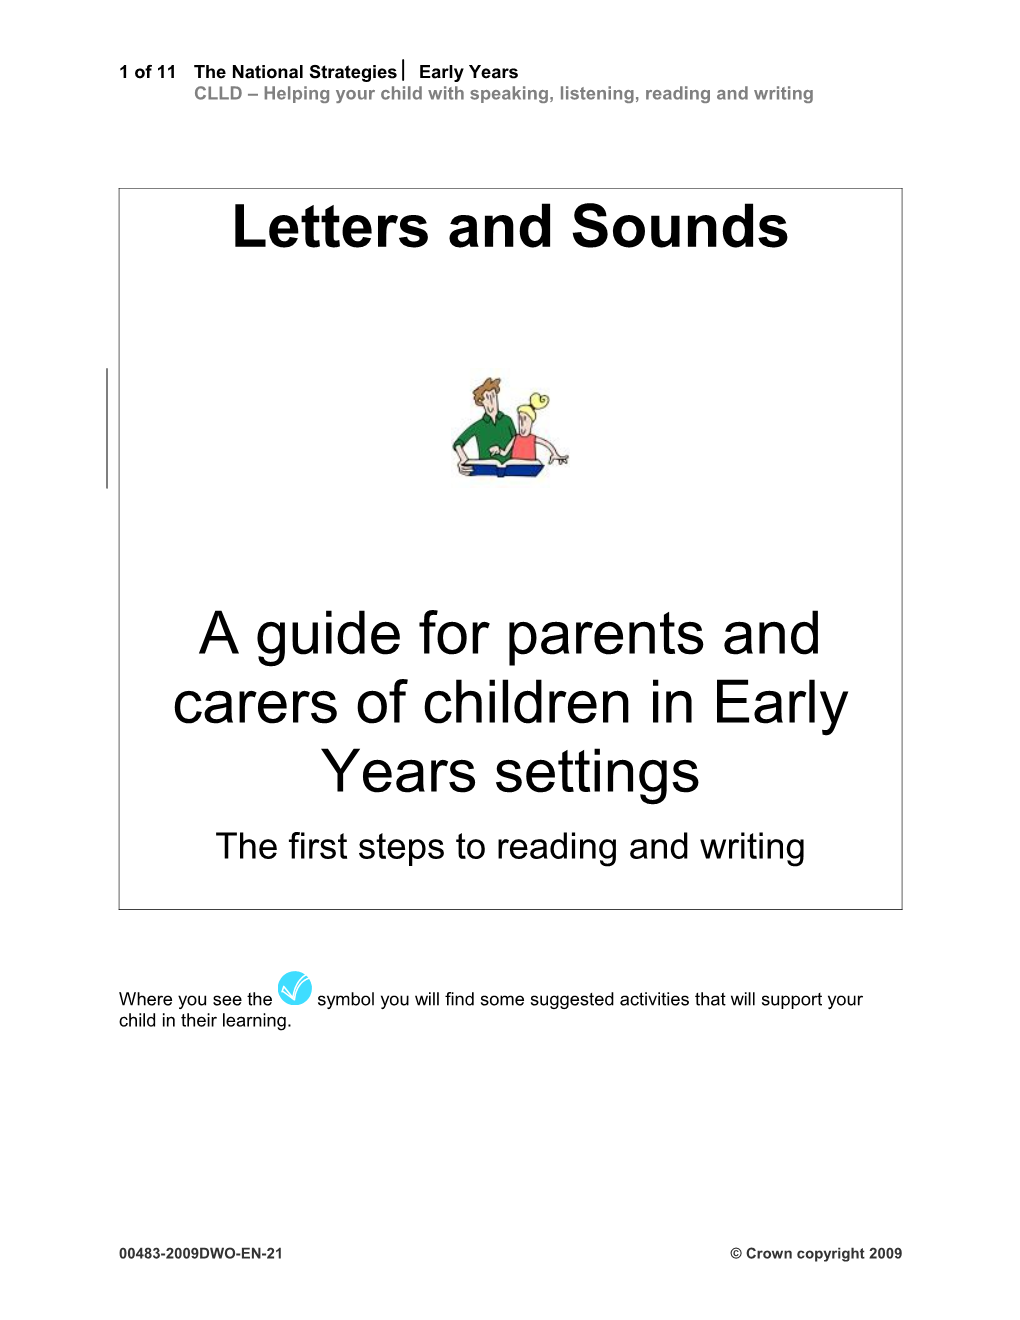 CLLD Helping Your Child with Speaking, Listening, Reading and Writing